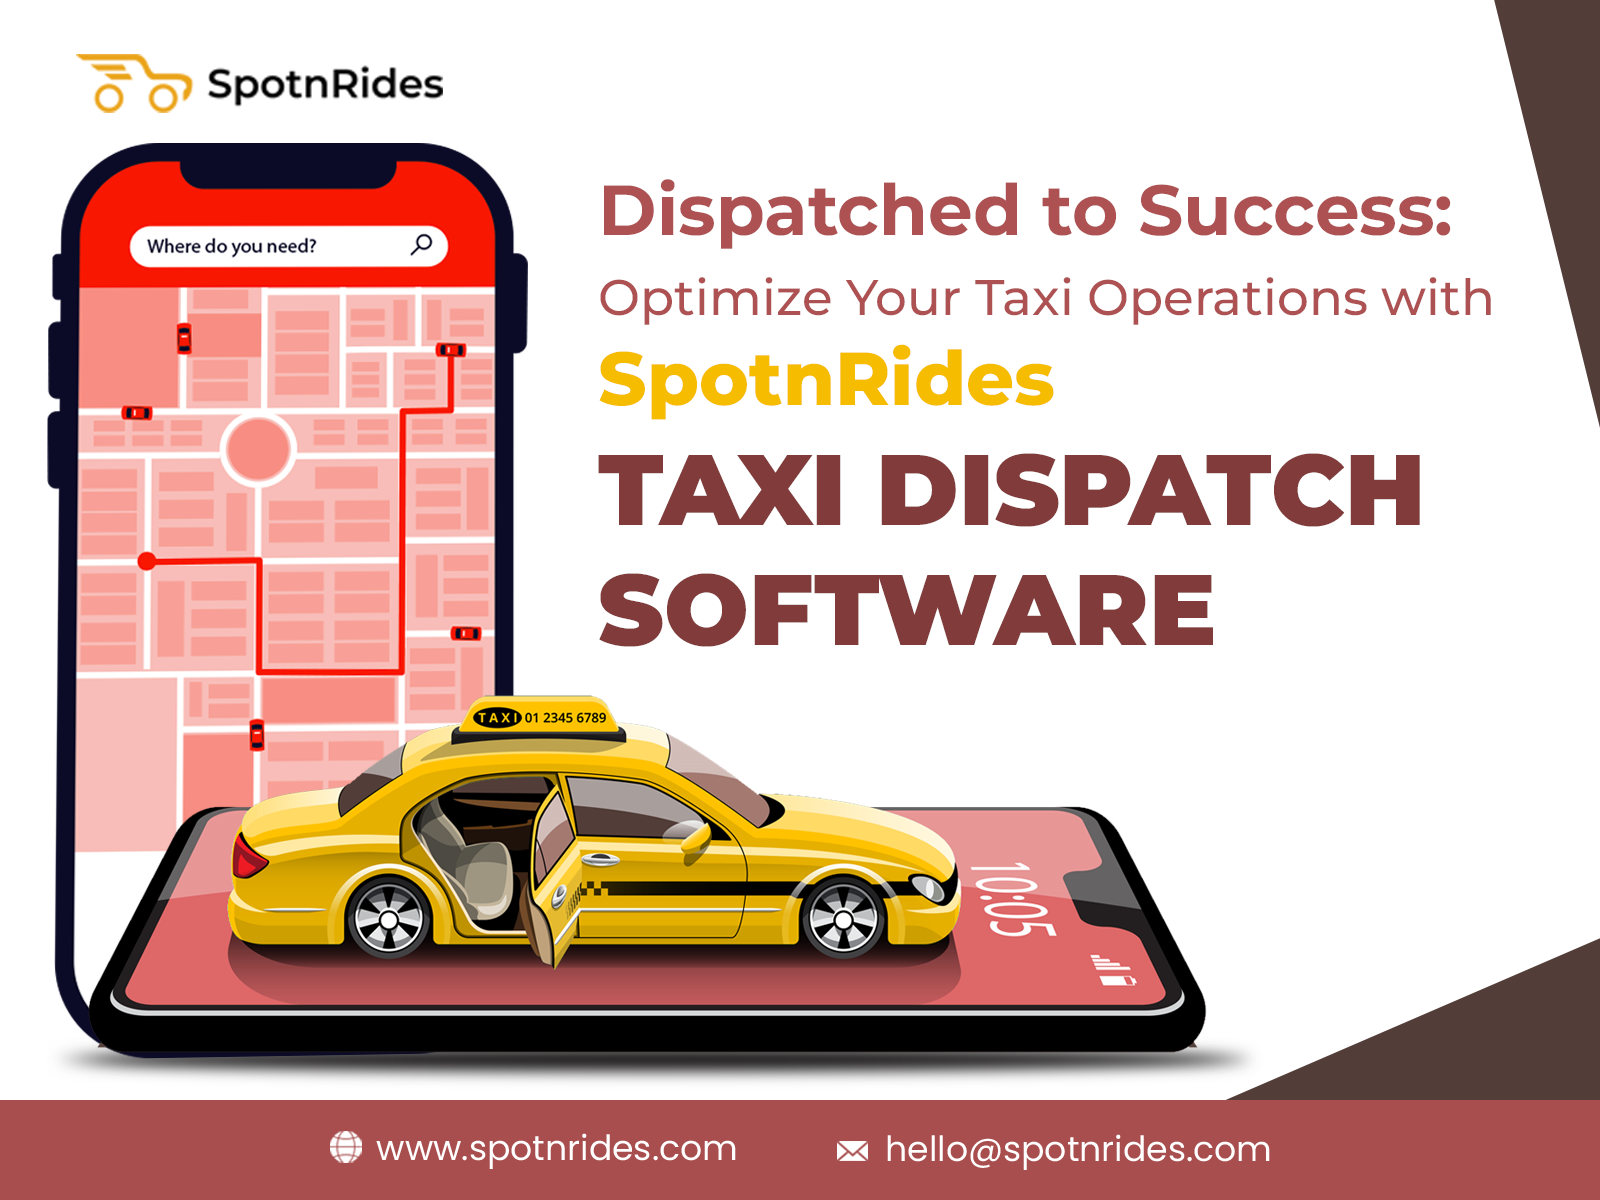 Looking for Taxi Dispatch Software for your business managem - Indiana - Indianapolis ID1537702